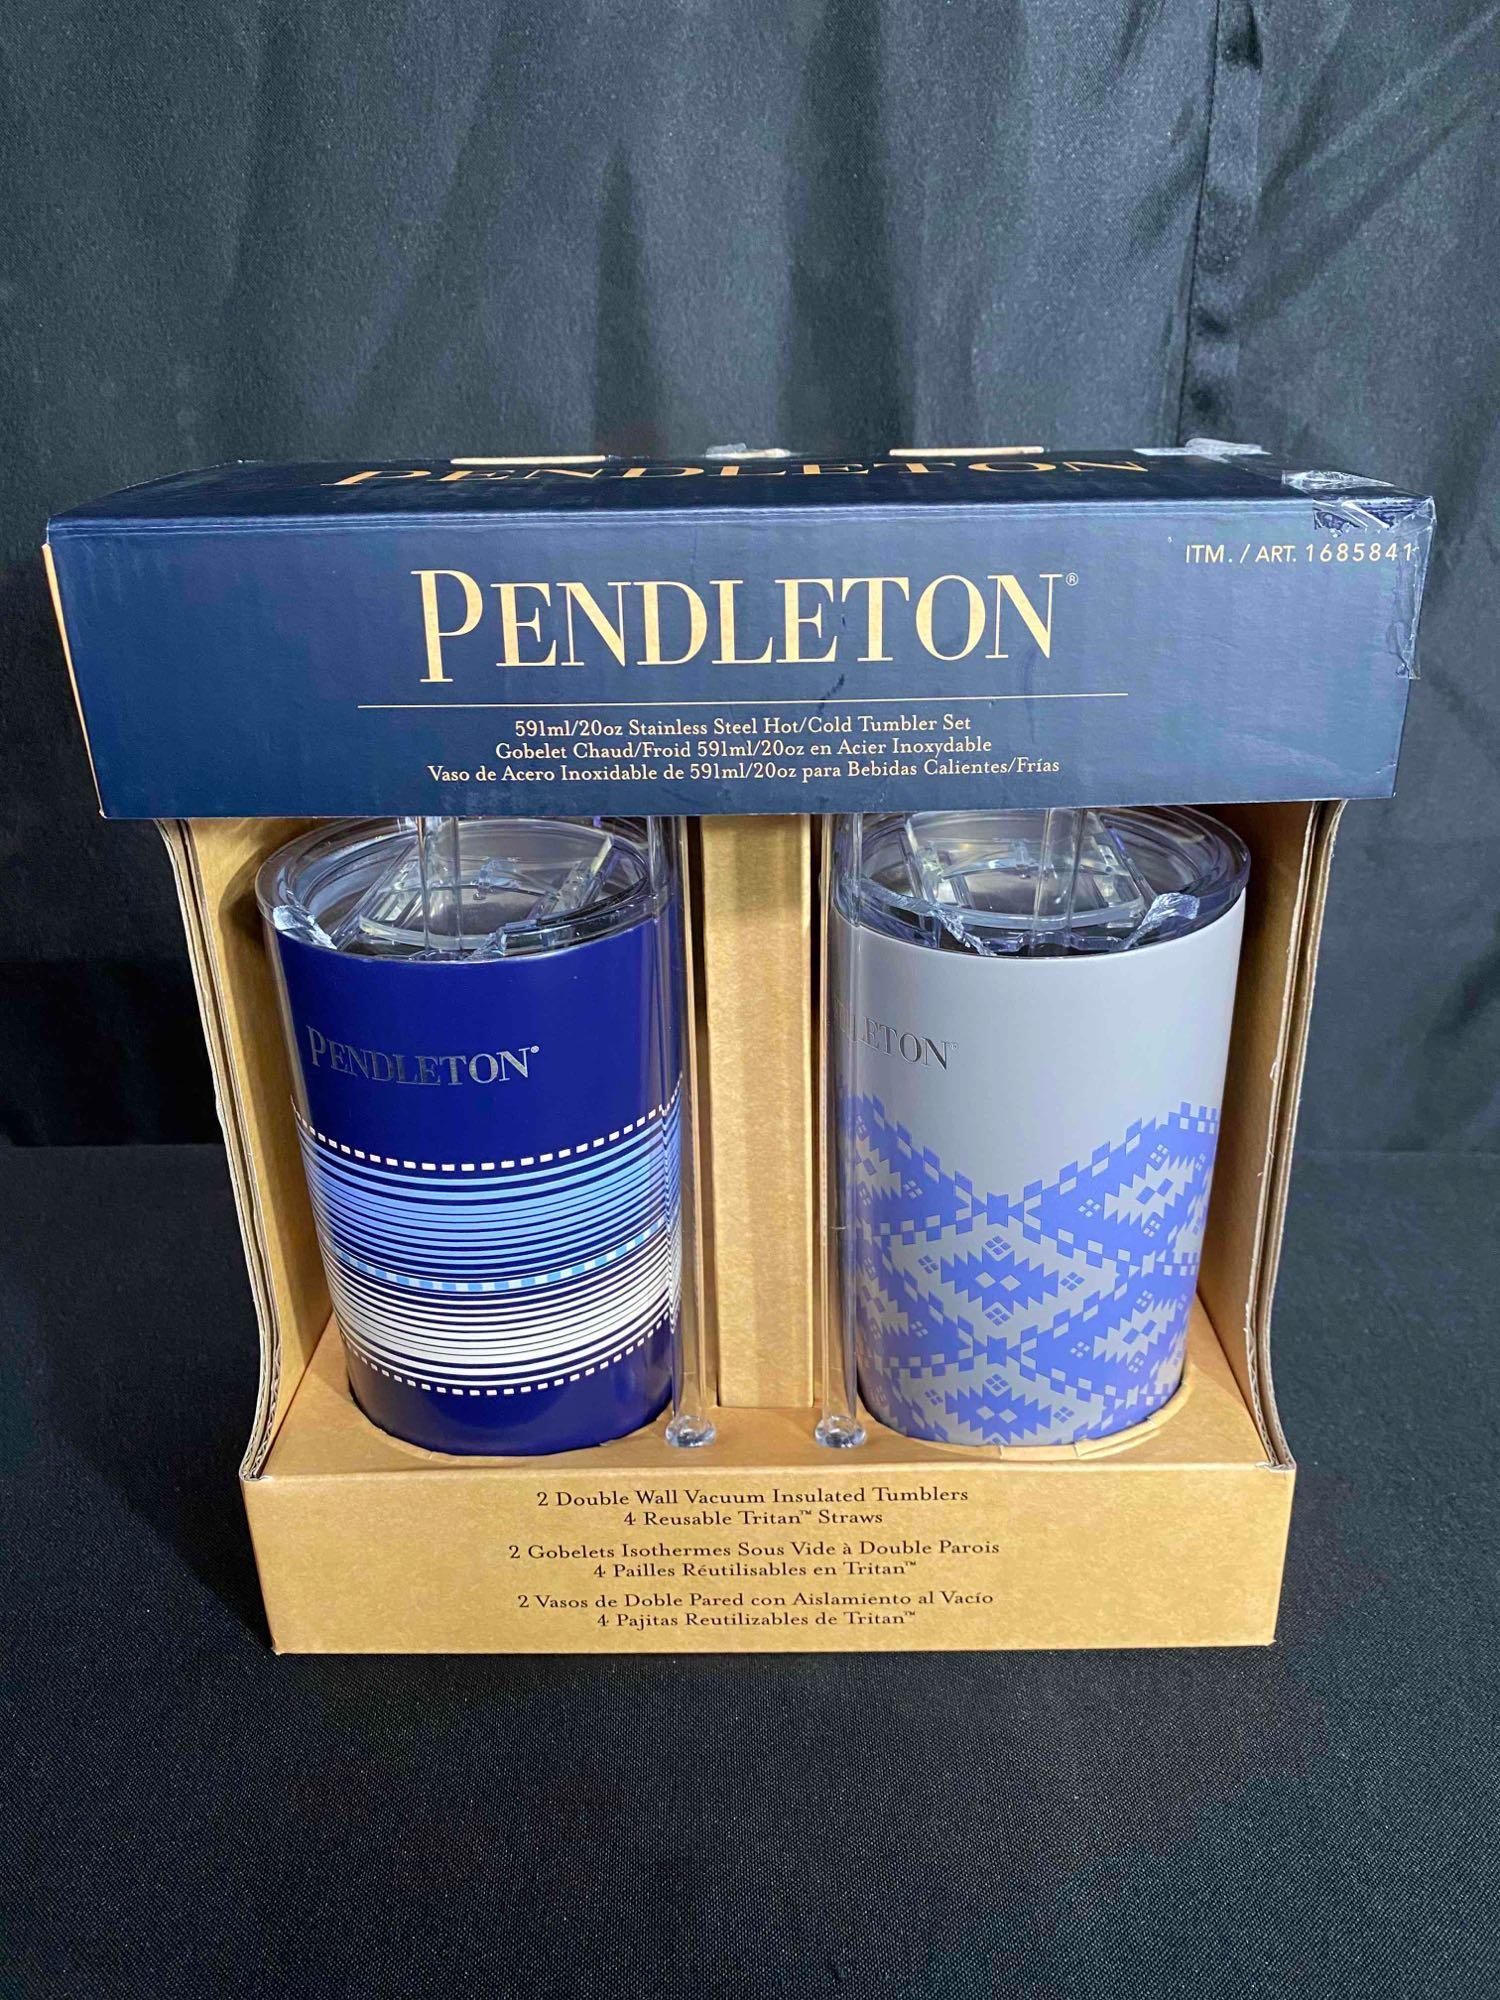 Pendleton Tumblers Cups Set Of 2 NEW 20 oz Double Wall Vacuum